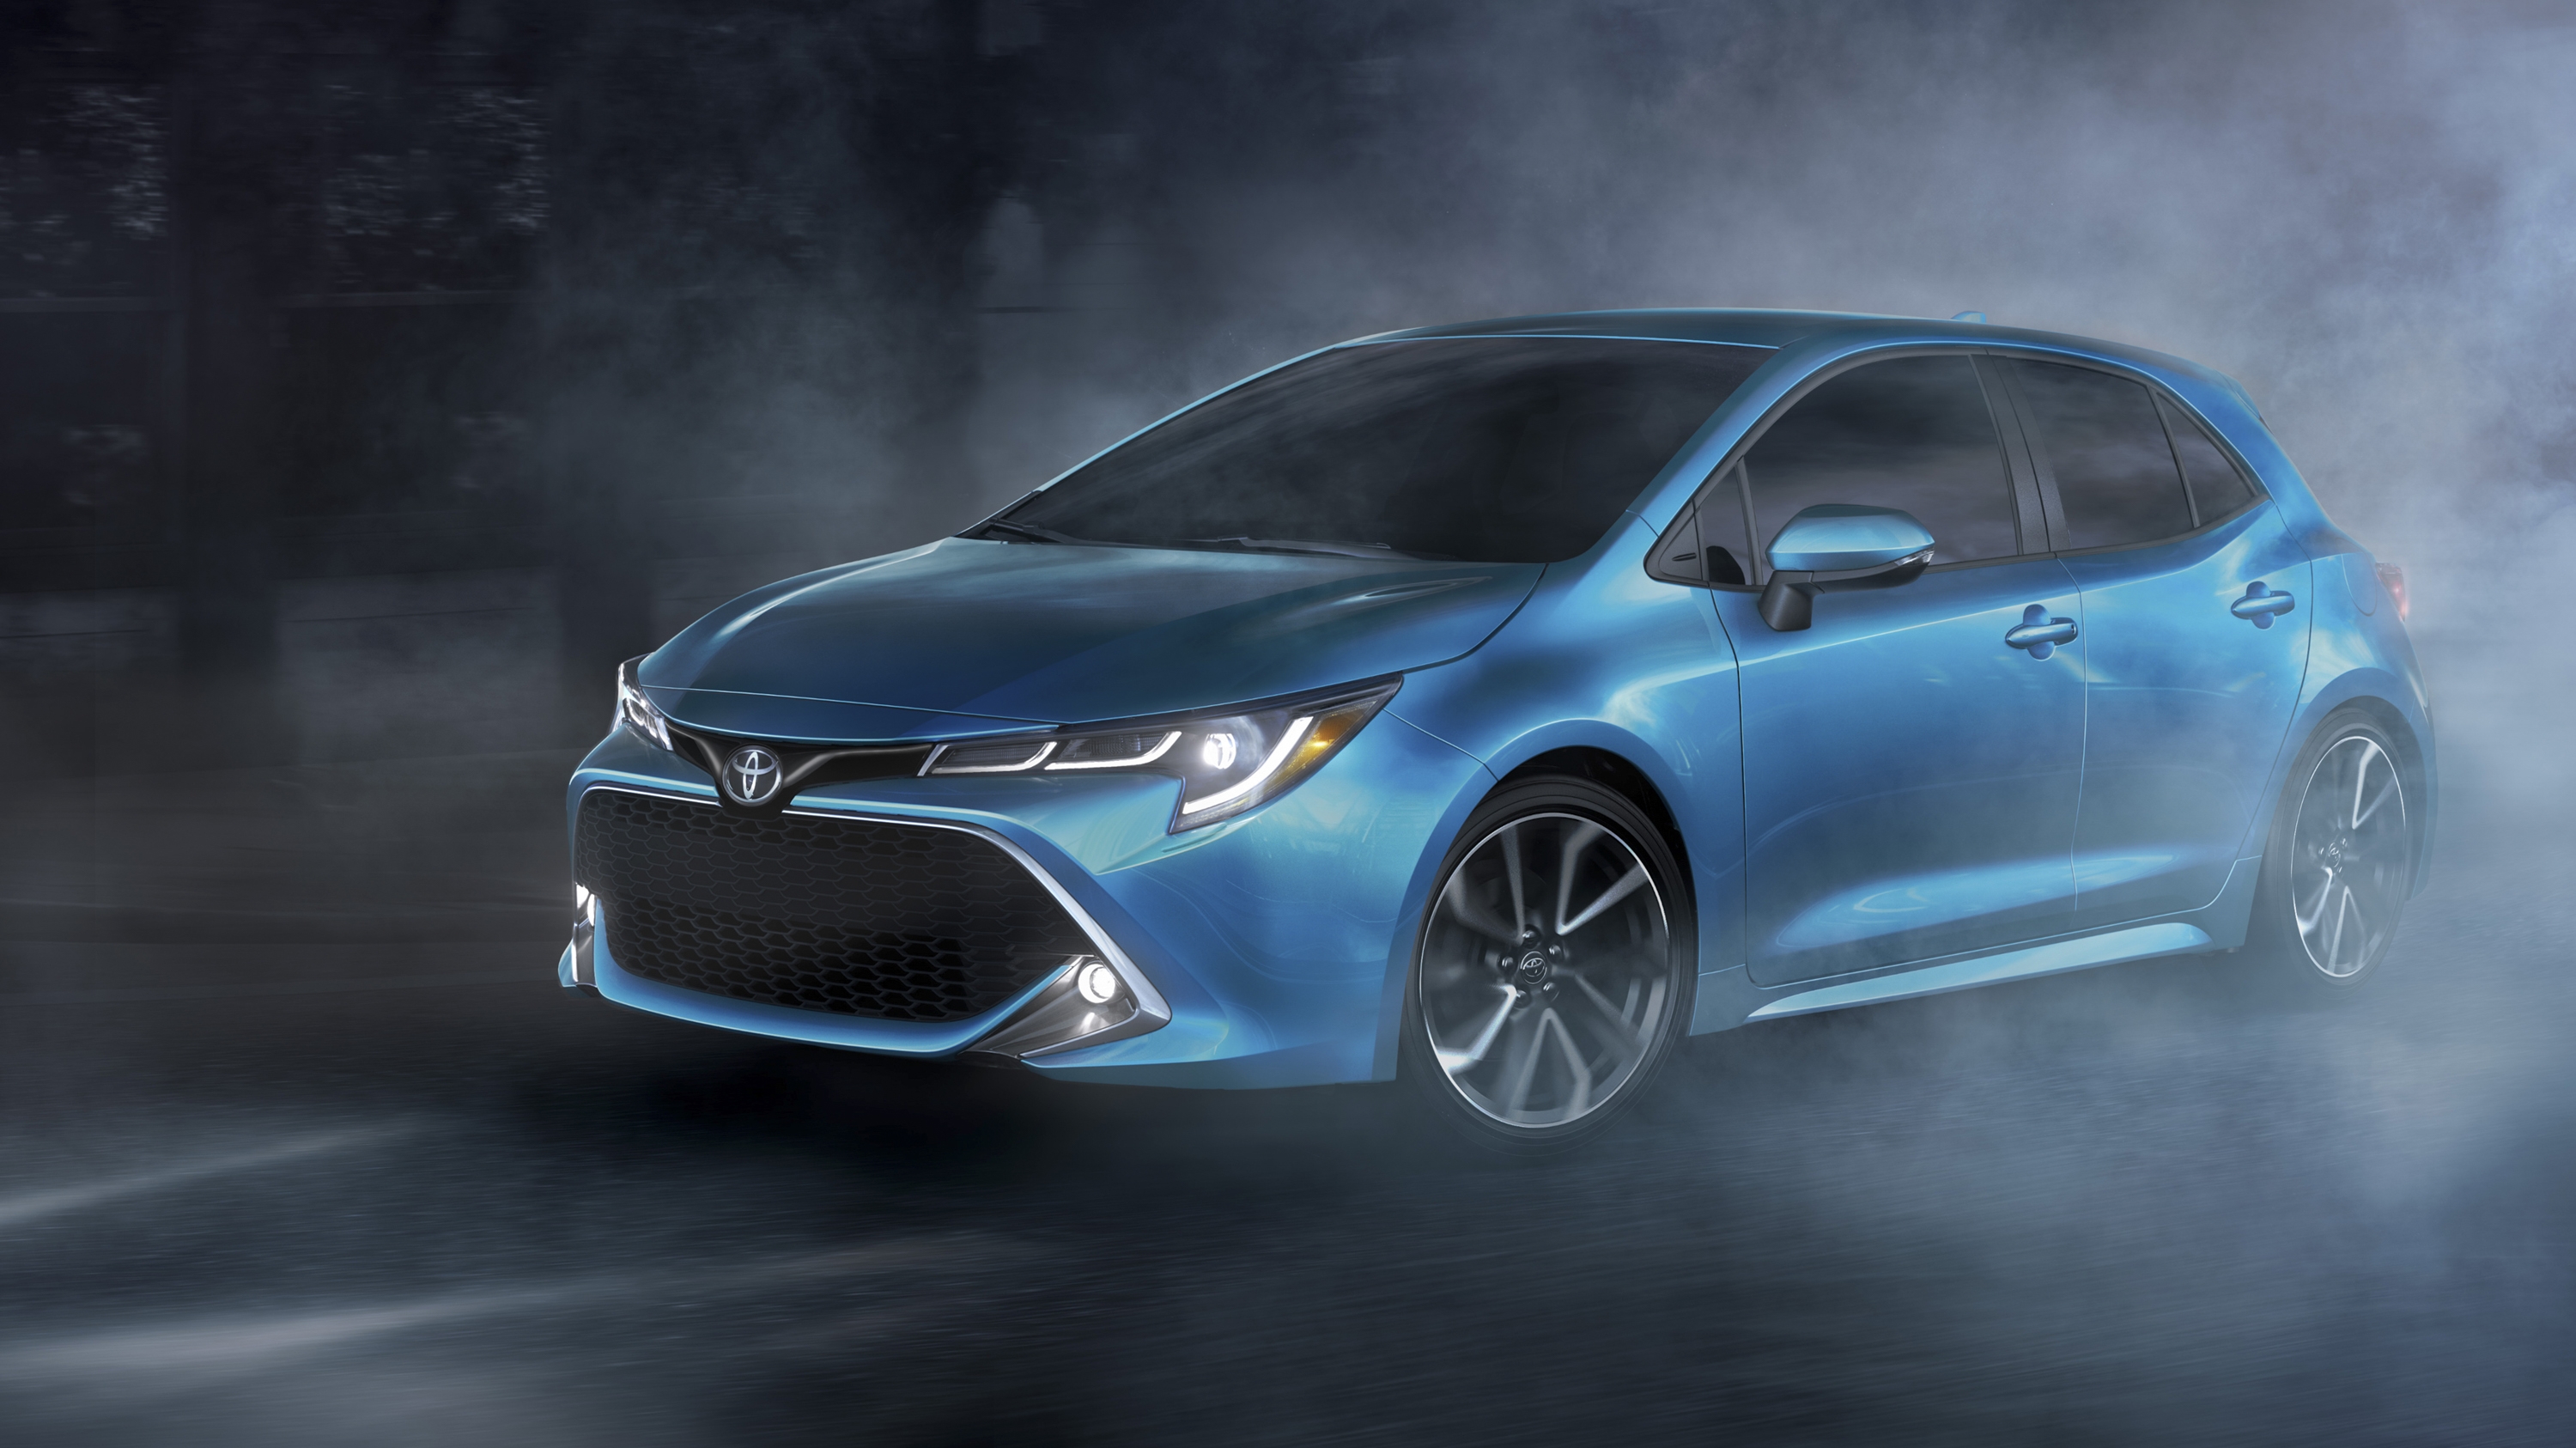 2019 Toyota Corolla Hatchback Pictures, Photos, Wallpapers - Toyota Corolla Hatchback India , HD Wallpaper & Backgrounds